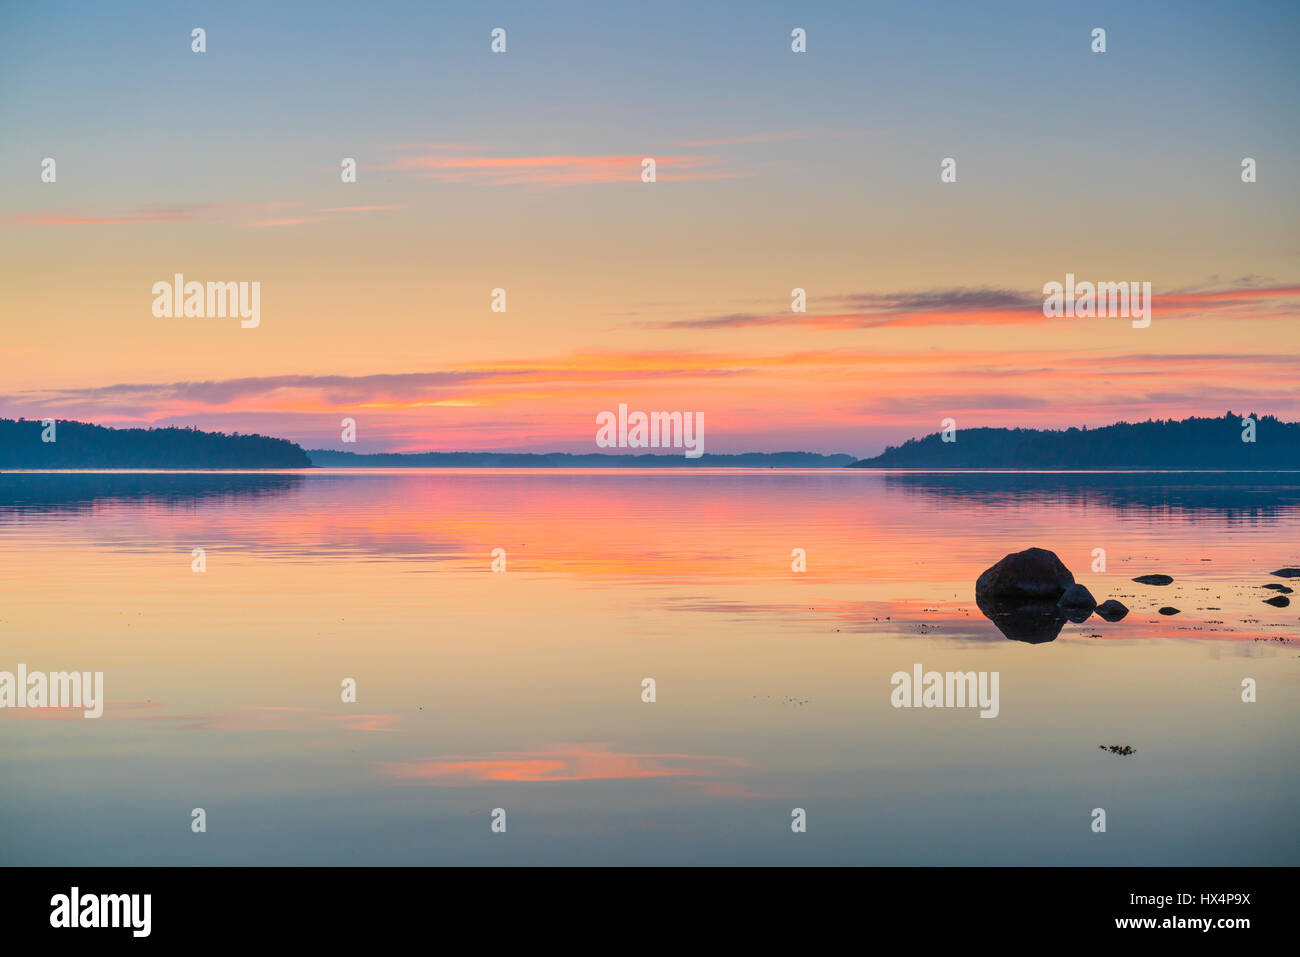 THE SWEDISH FINNISH ARCHIPELAGO IN THE BALTIC SEA AT SUNSET OR SUNRISE WITH RICH COLOURS AND ROCKS IN THE FOREGROUND WITH REFLECTIONS Stock Photo